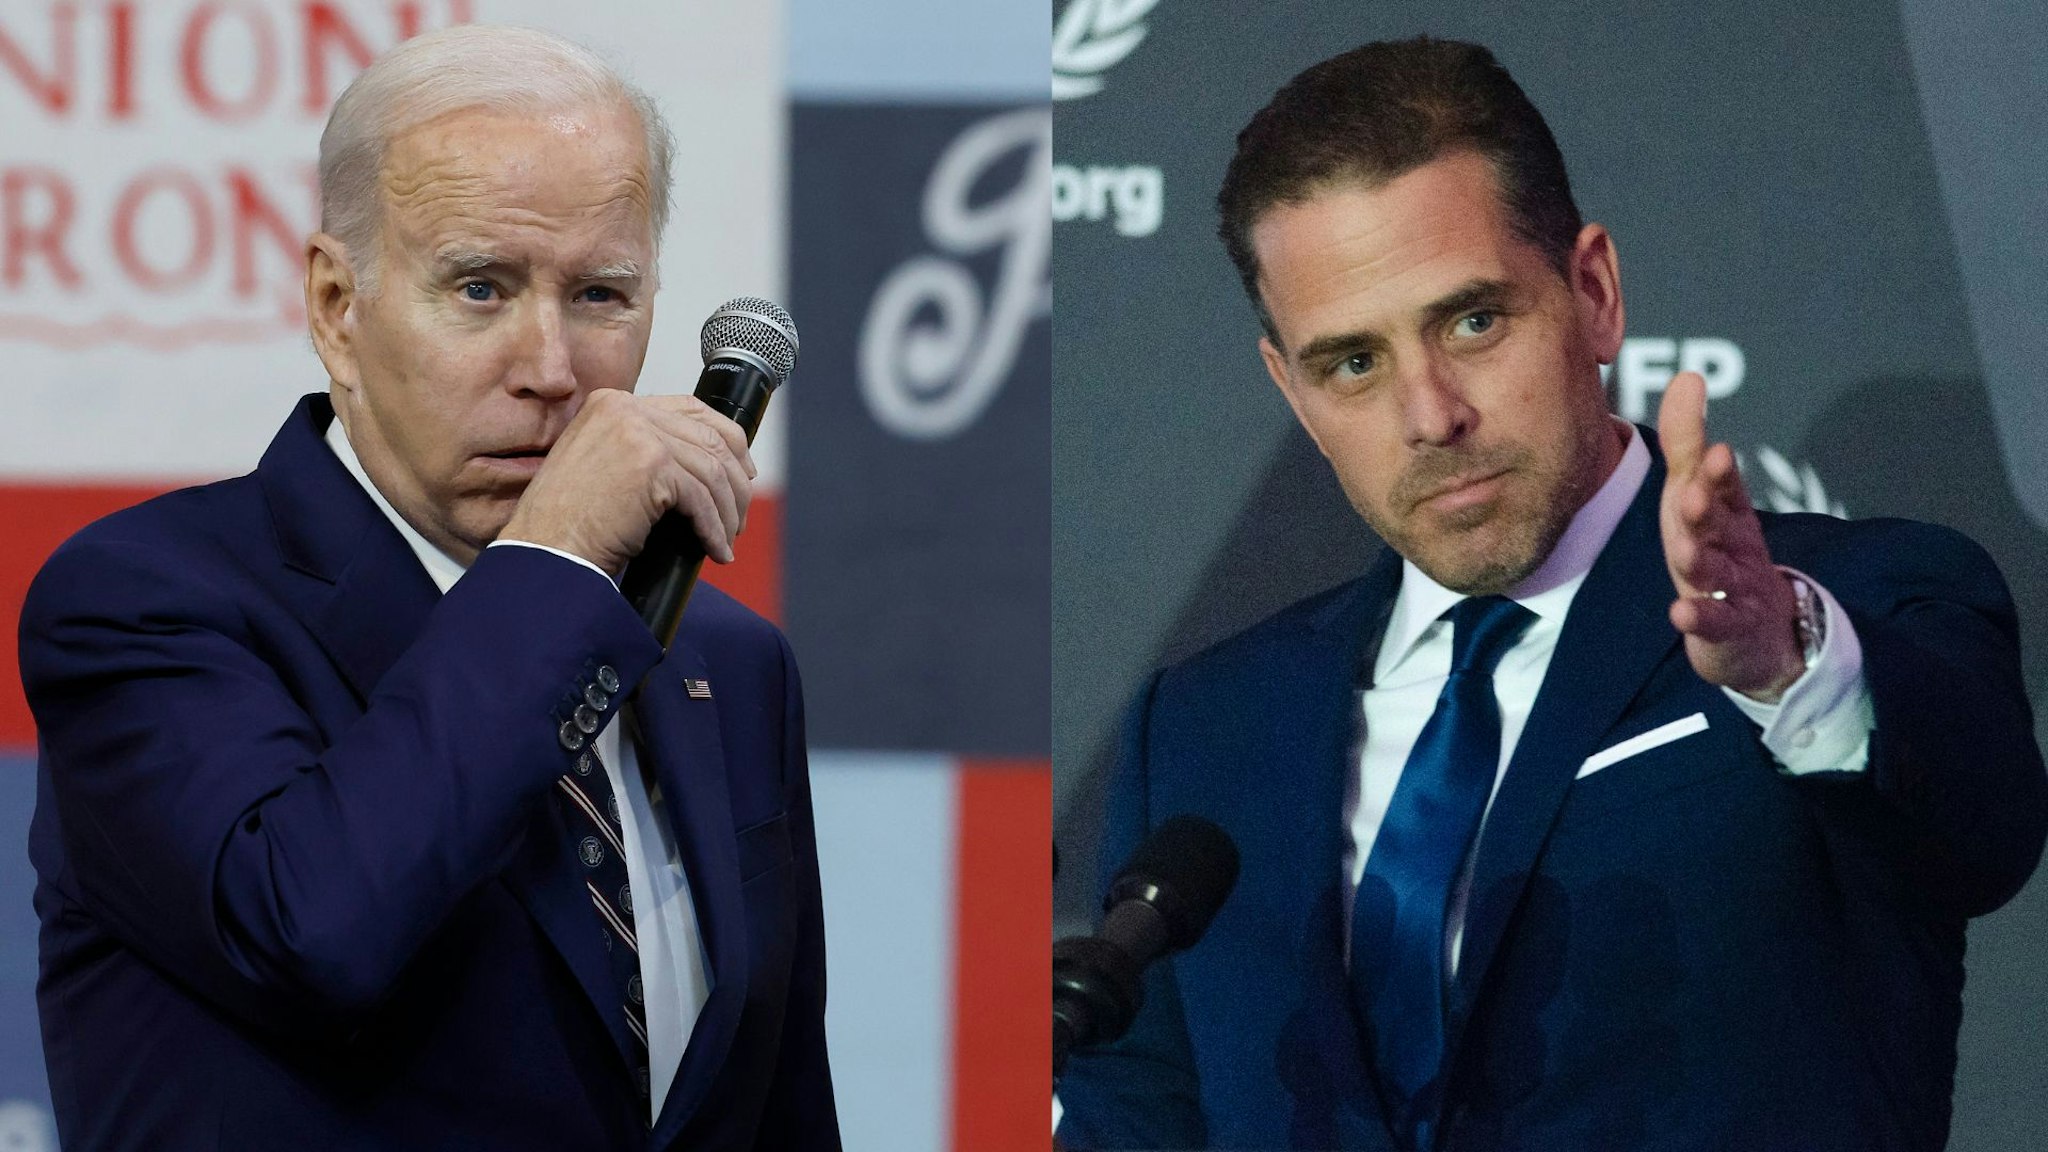 WASHINGTON, DC - APRIL 12: WFP USA Board Chair Hunter Biden speaks during the World Food Program USA's 2016 McGovern-Dole Leadership Award Ceremony at the Organization of American States on April 12, 2016 in Washington, DC. PHILADELPHIA, PENNSYLVANIA - MARCH 09: U.S. President Joe Biden pauses to cough while talking about his proposed FY2024 federal budget during an event at the Finishing Trades Institute on March 09, 2023 in Philadelphia, Pennsylvania. Seen as a preview to his re-election platform, Biden's proposed budget is projected to cut the deficit by $3 trillion over the next 10 years but will find no support in the Republican-controlled House of Representatives.